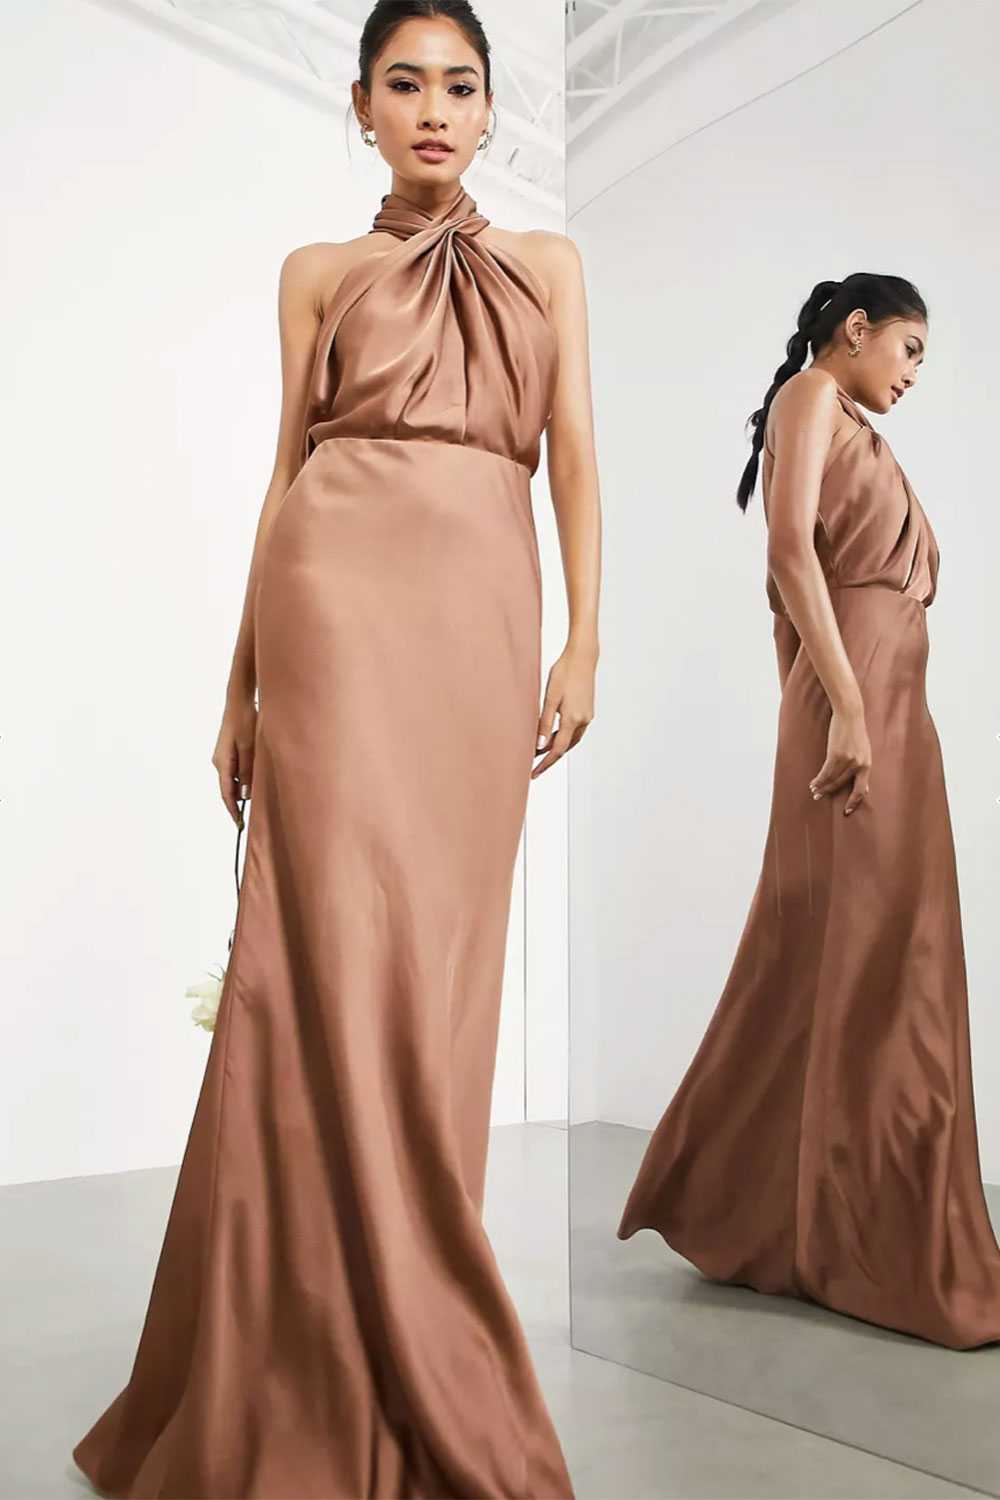 Feelthelion prom dresses 2022 ASOS satin ruched halter 